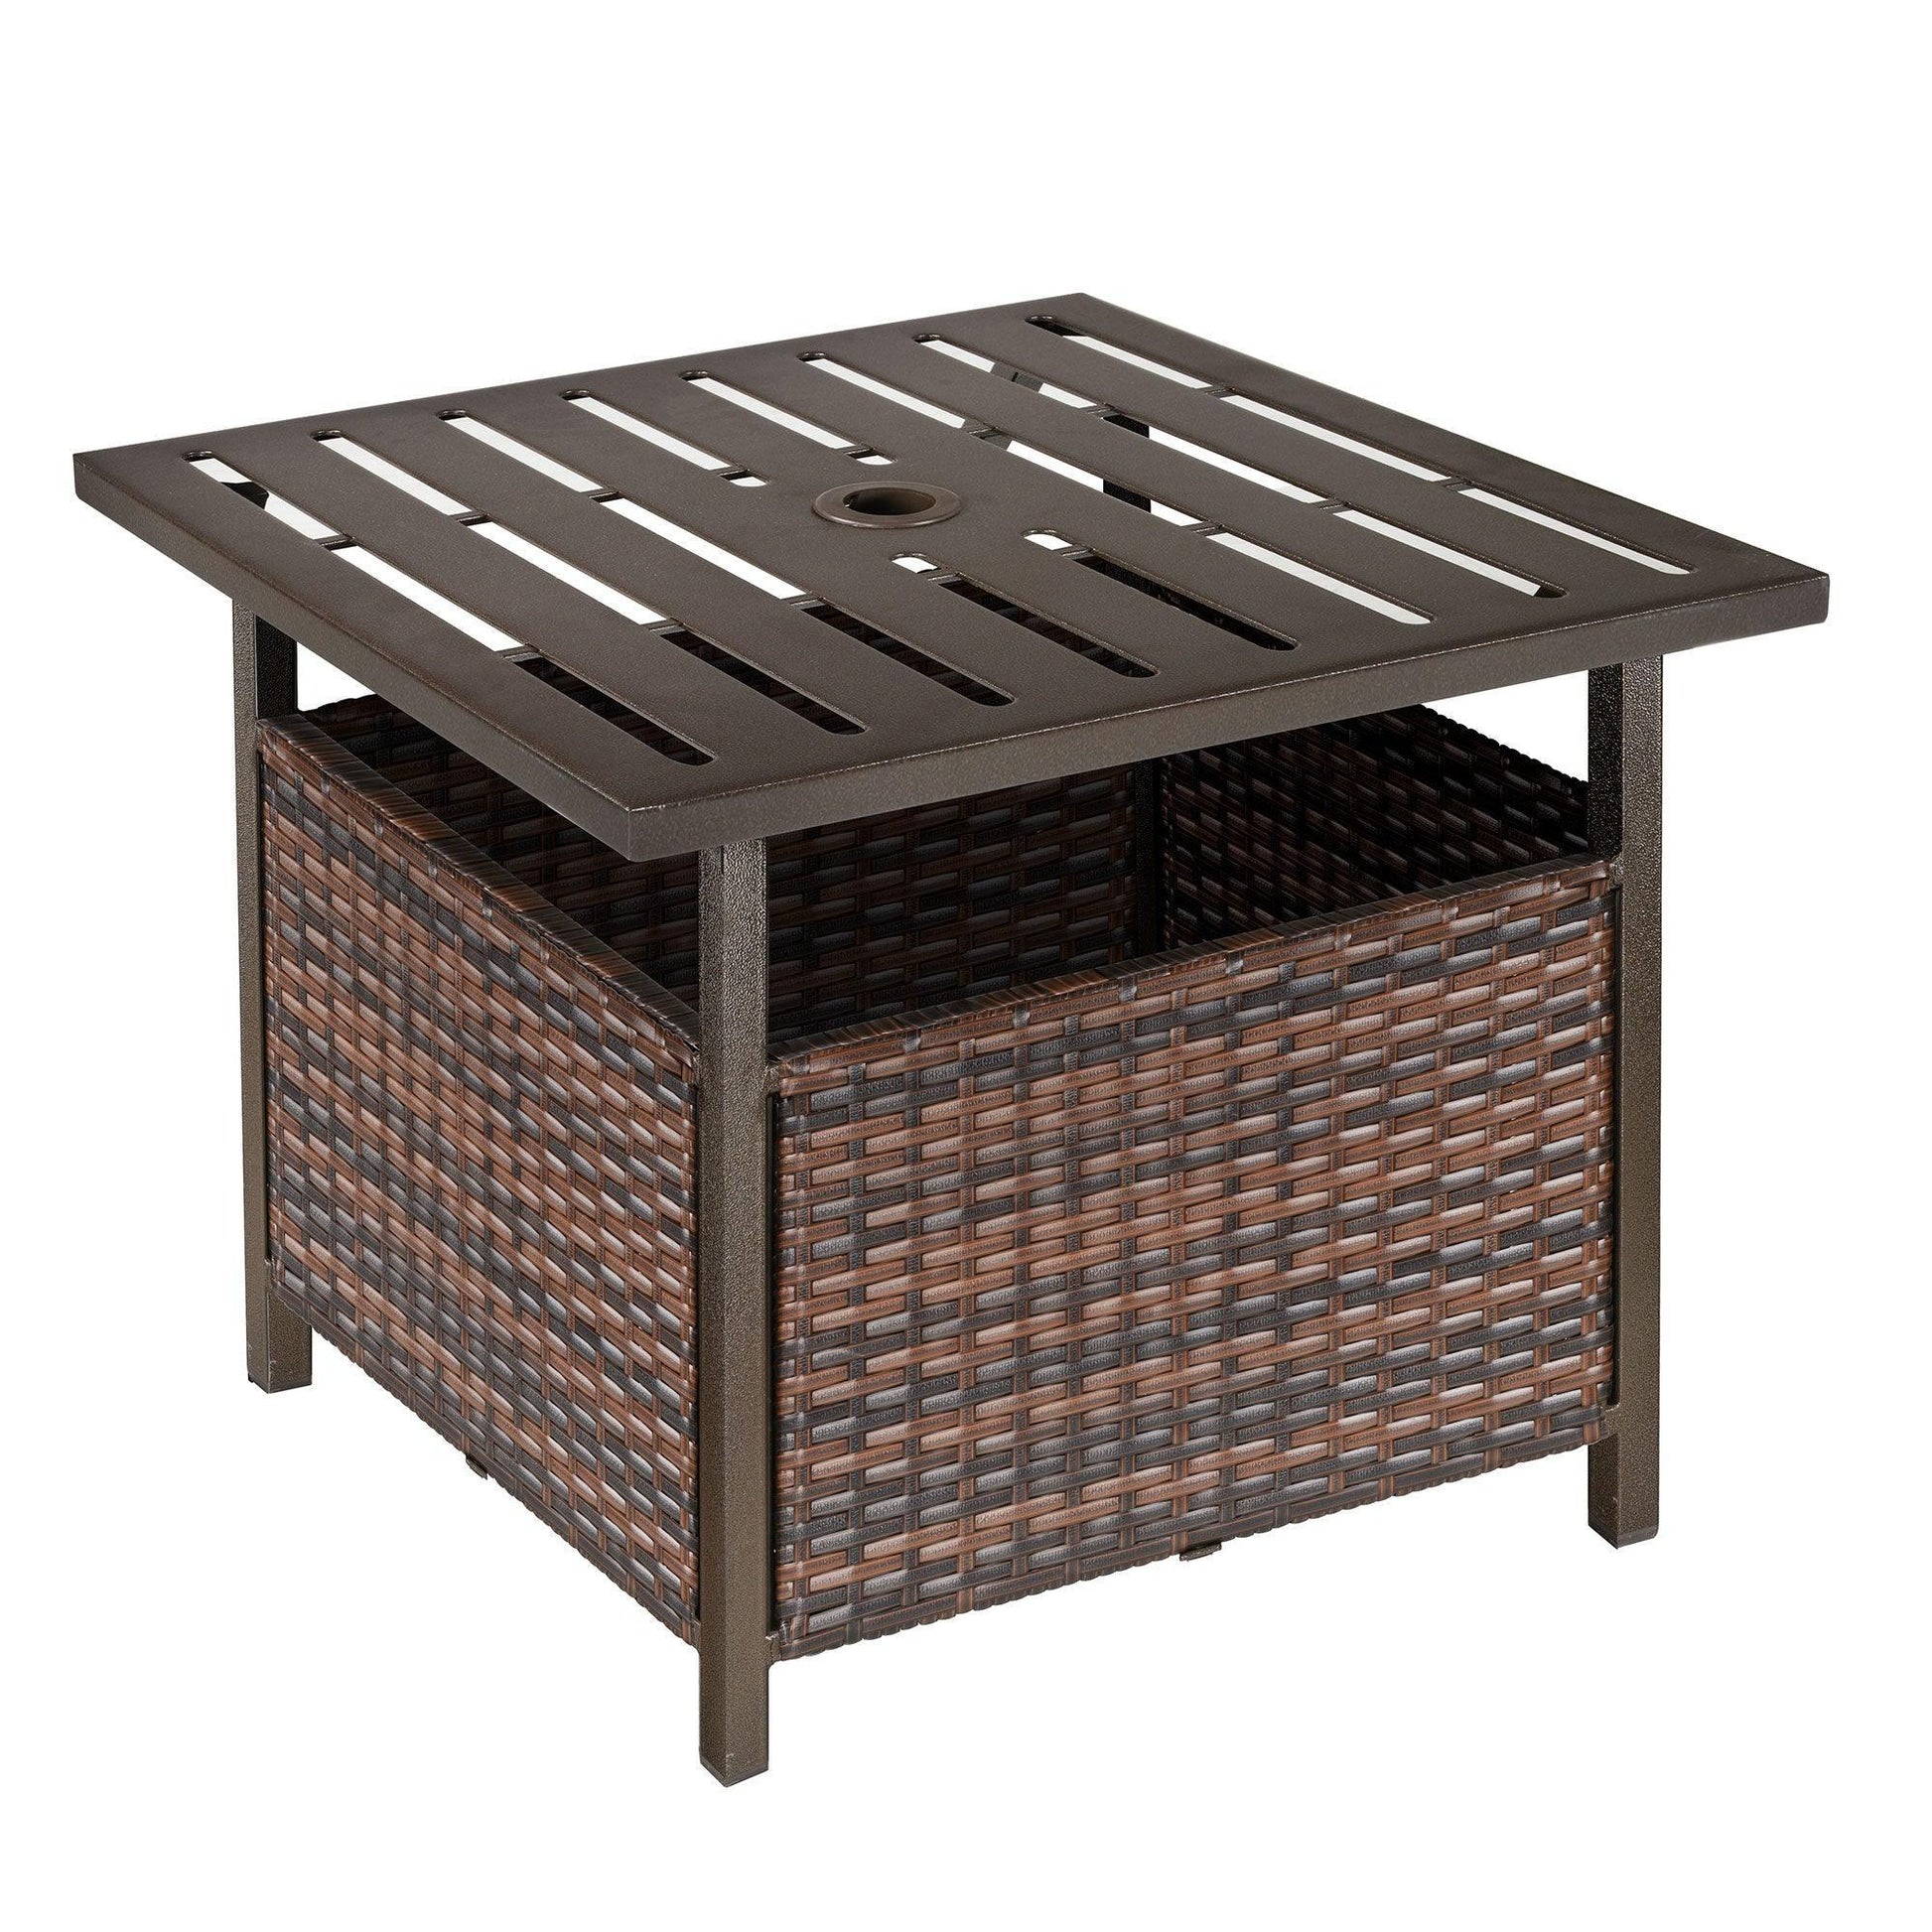 Outsunny Outdoor Rattan Patio Coffee Table with Umbrella Hole - Brown - ALL4U RETAILER LTD